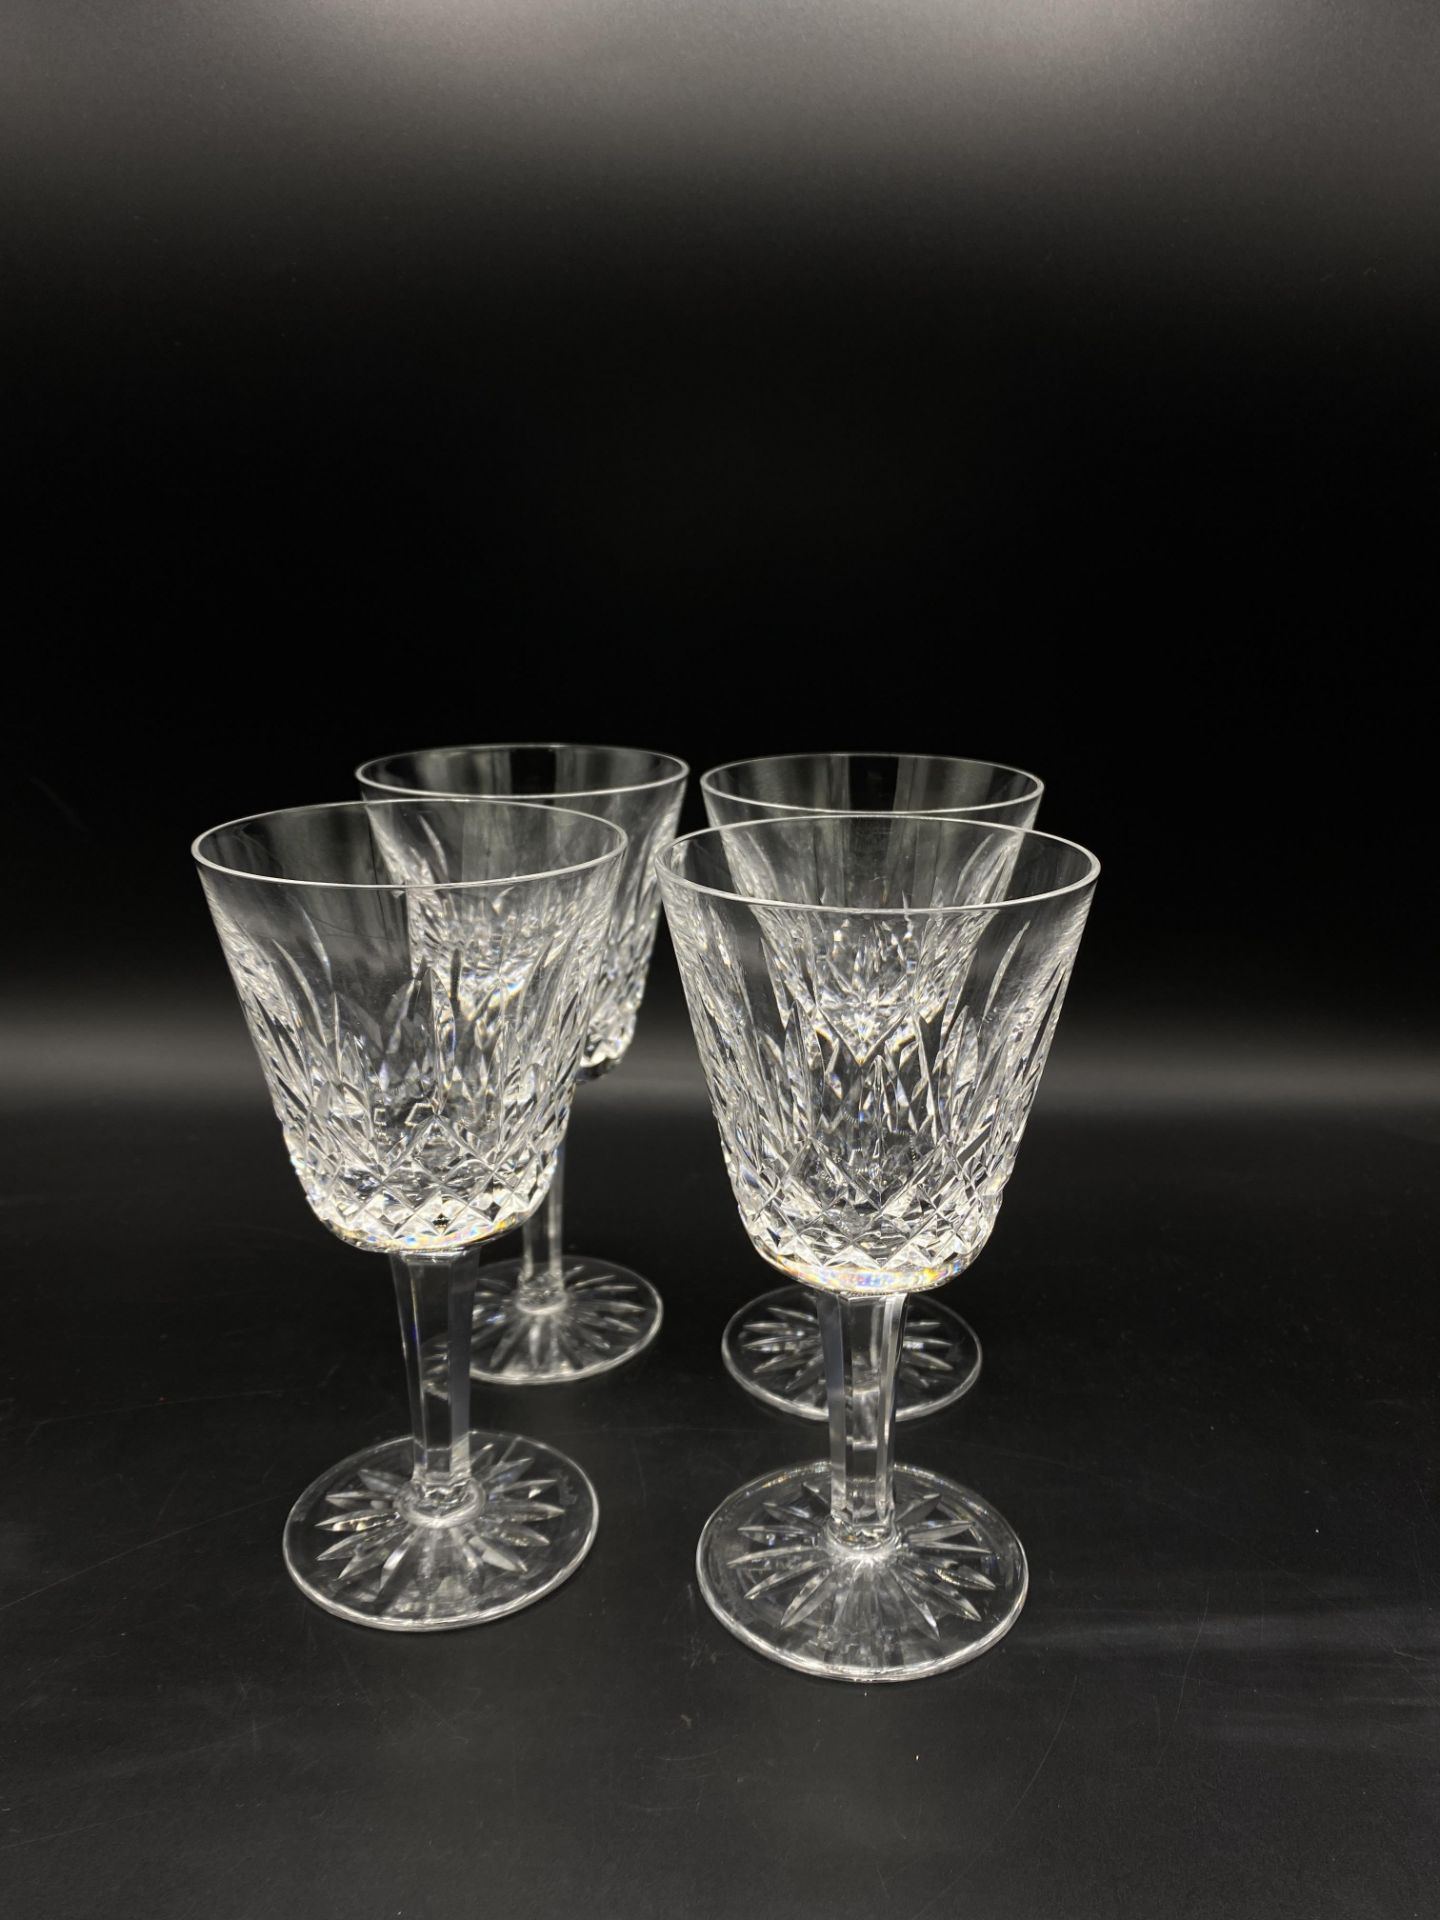 Four Waterford crystal wine glasses